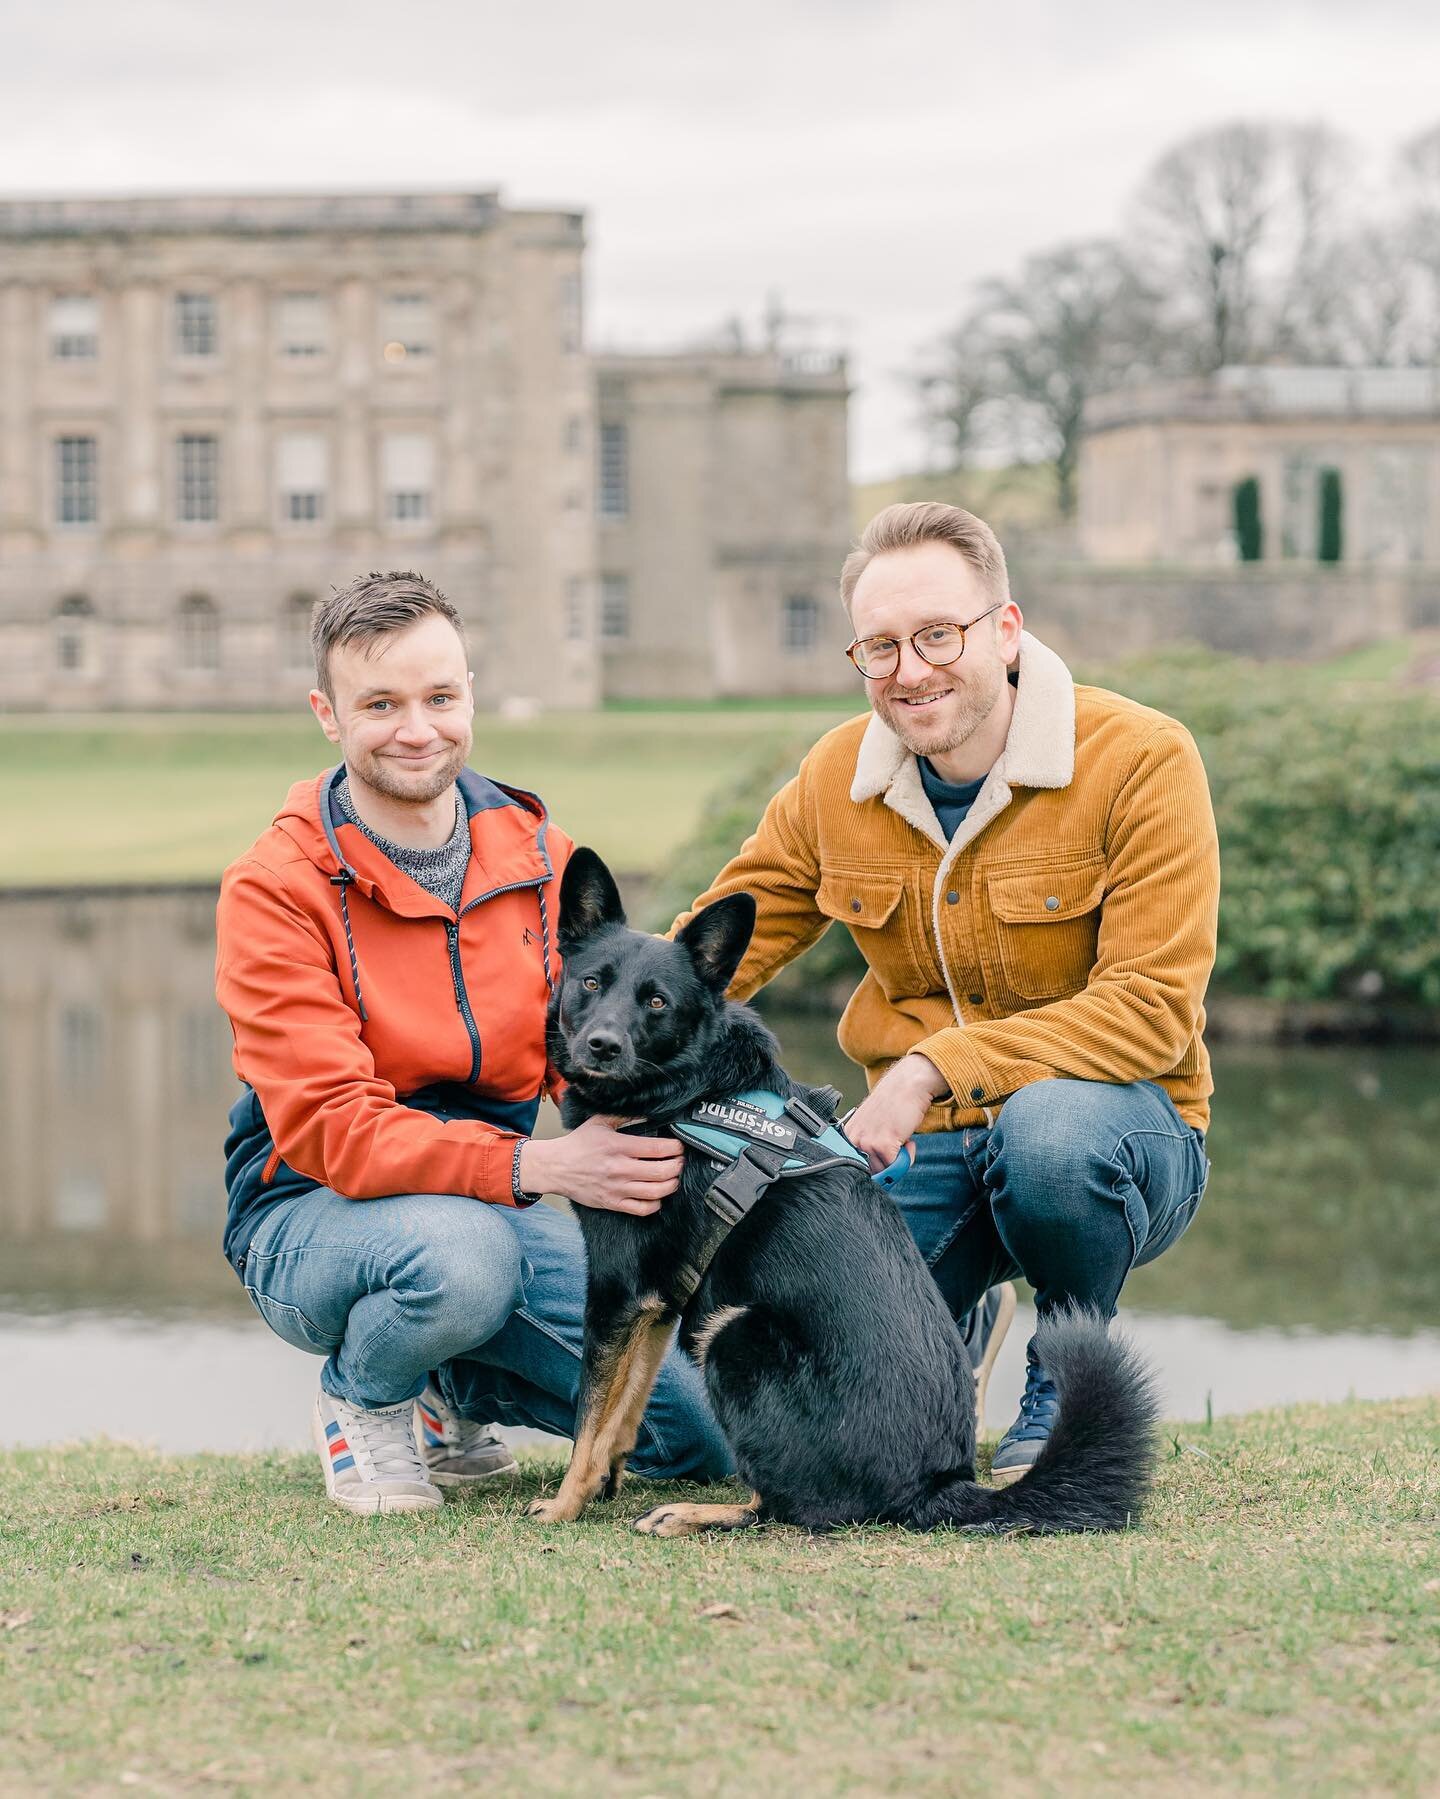 Last week I caught up with @robertward93 &amp; @garethlcarter for their pre-wedding photoshoot (as well as their lovely doggo, Danny!) at @nt_lymepark 🏛 

We had such a fantastic time catching up and I can&rsquo;t wait to see them again for their @h